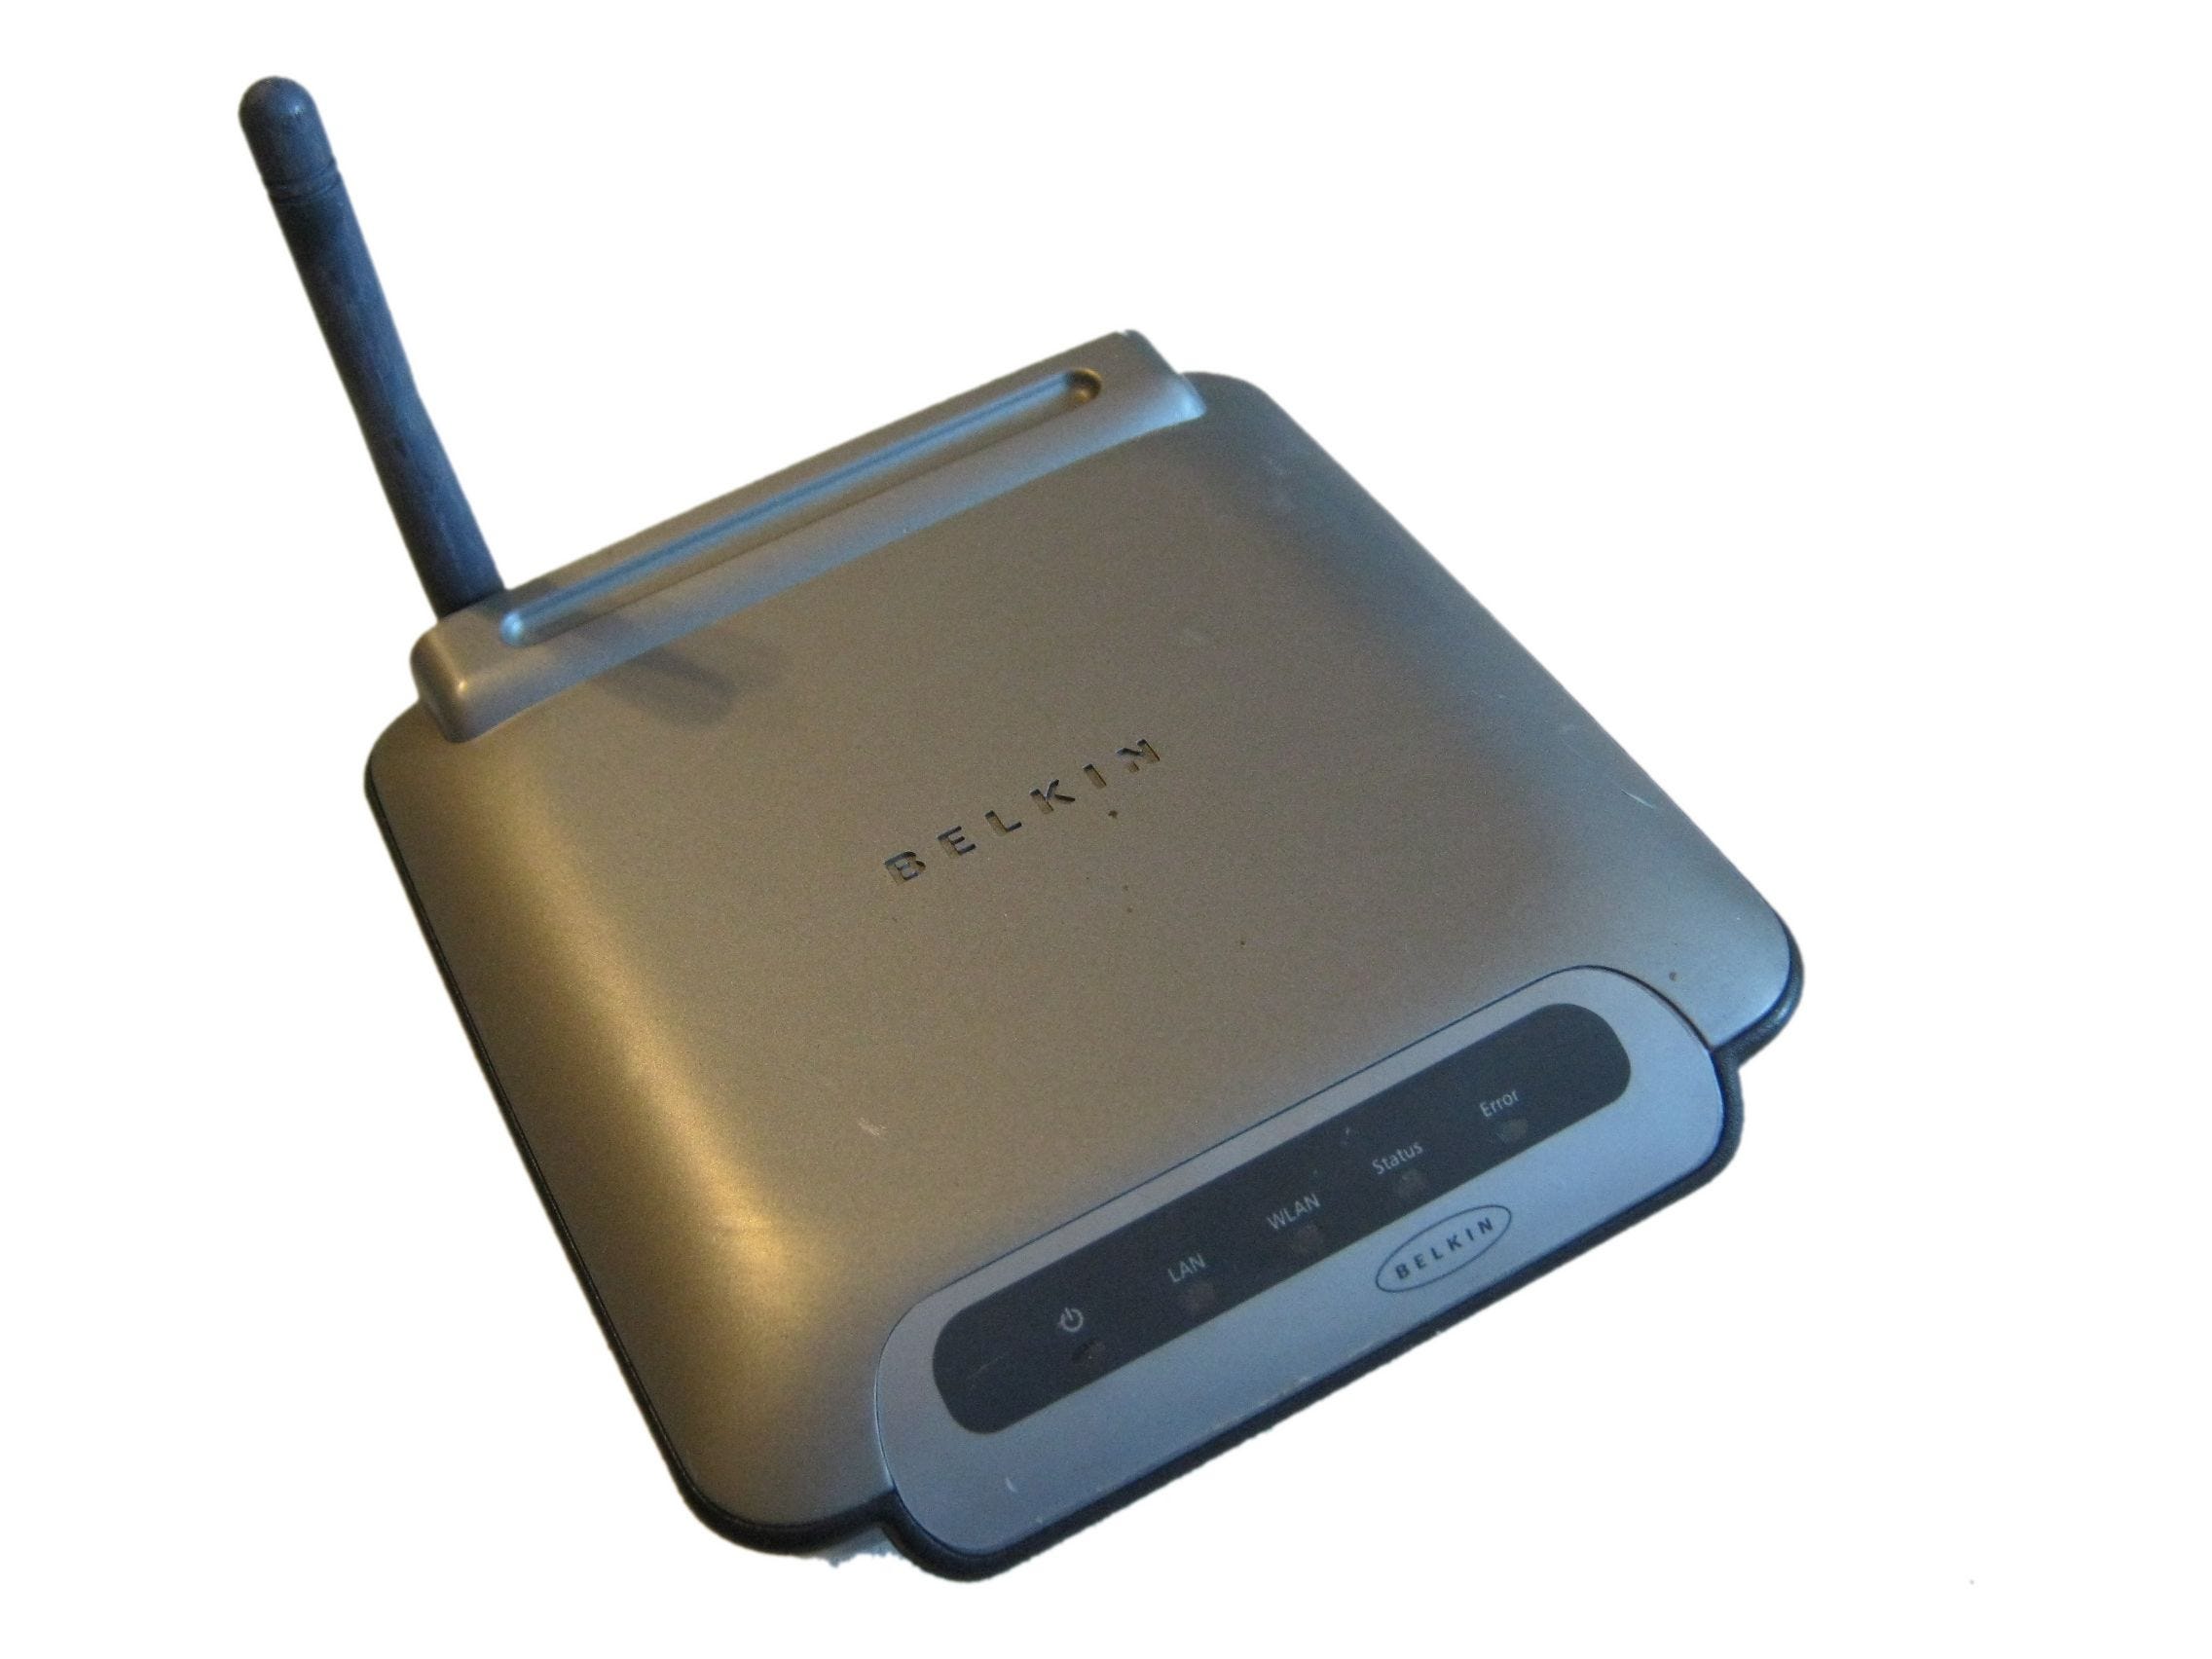 How Can A Printer Be Shared Using Belkin N300 Router Setup